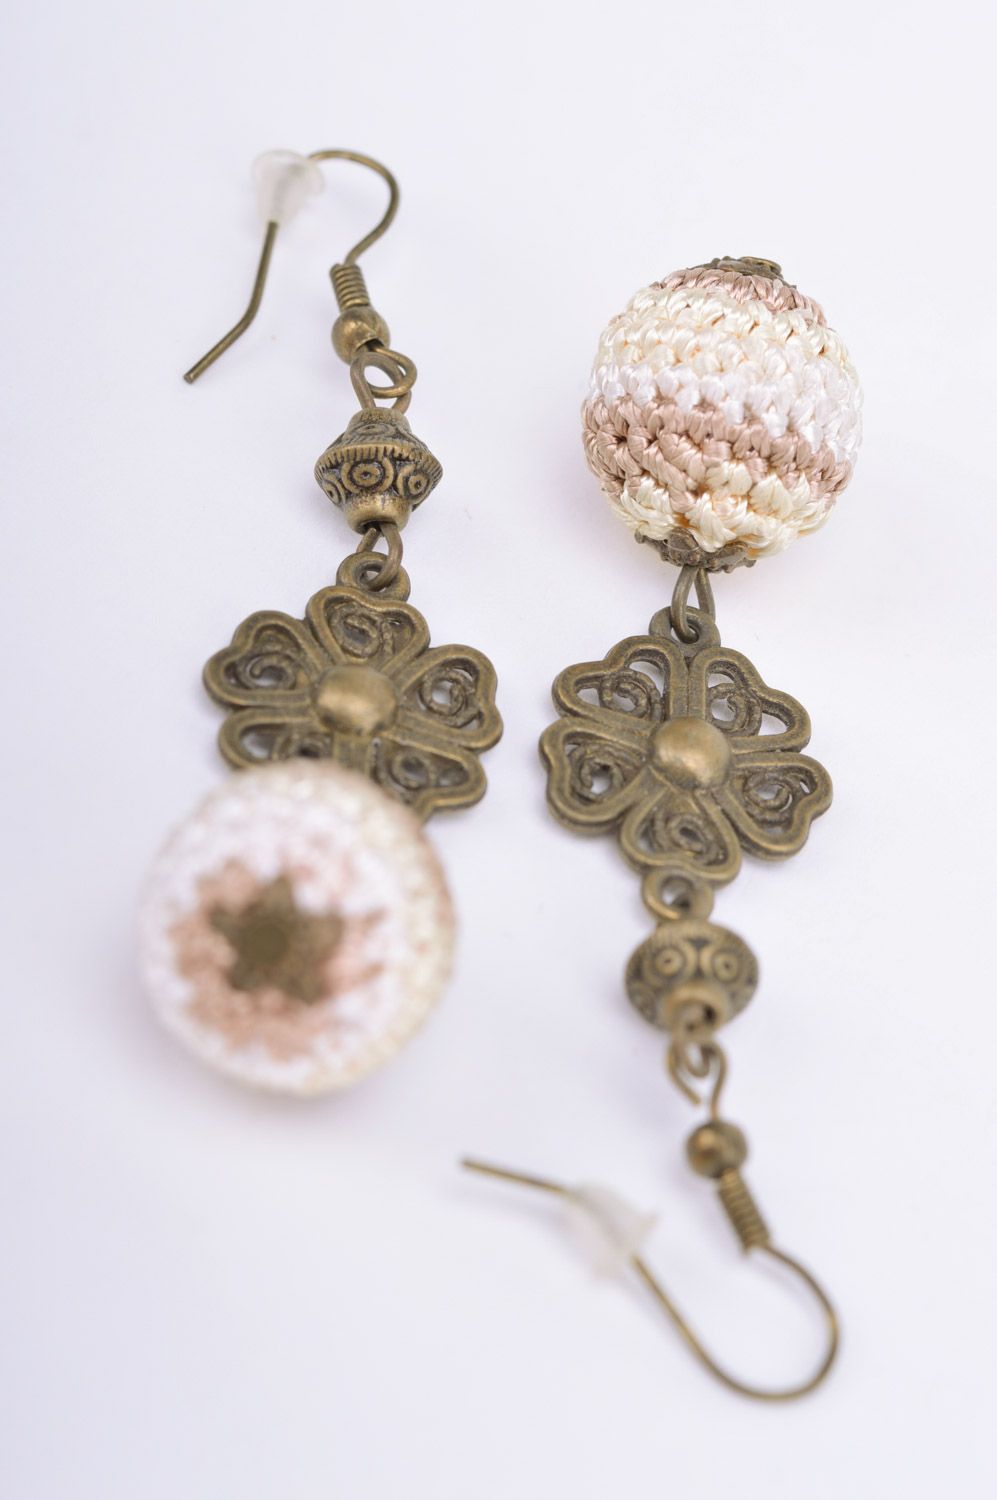 Handmade dangle earrings with metal fittings and light crocheted over beads photo 5